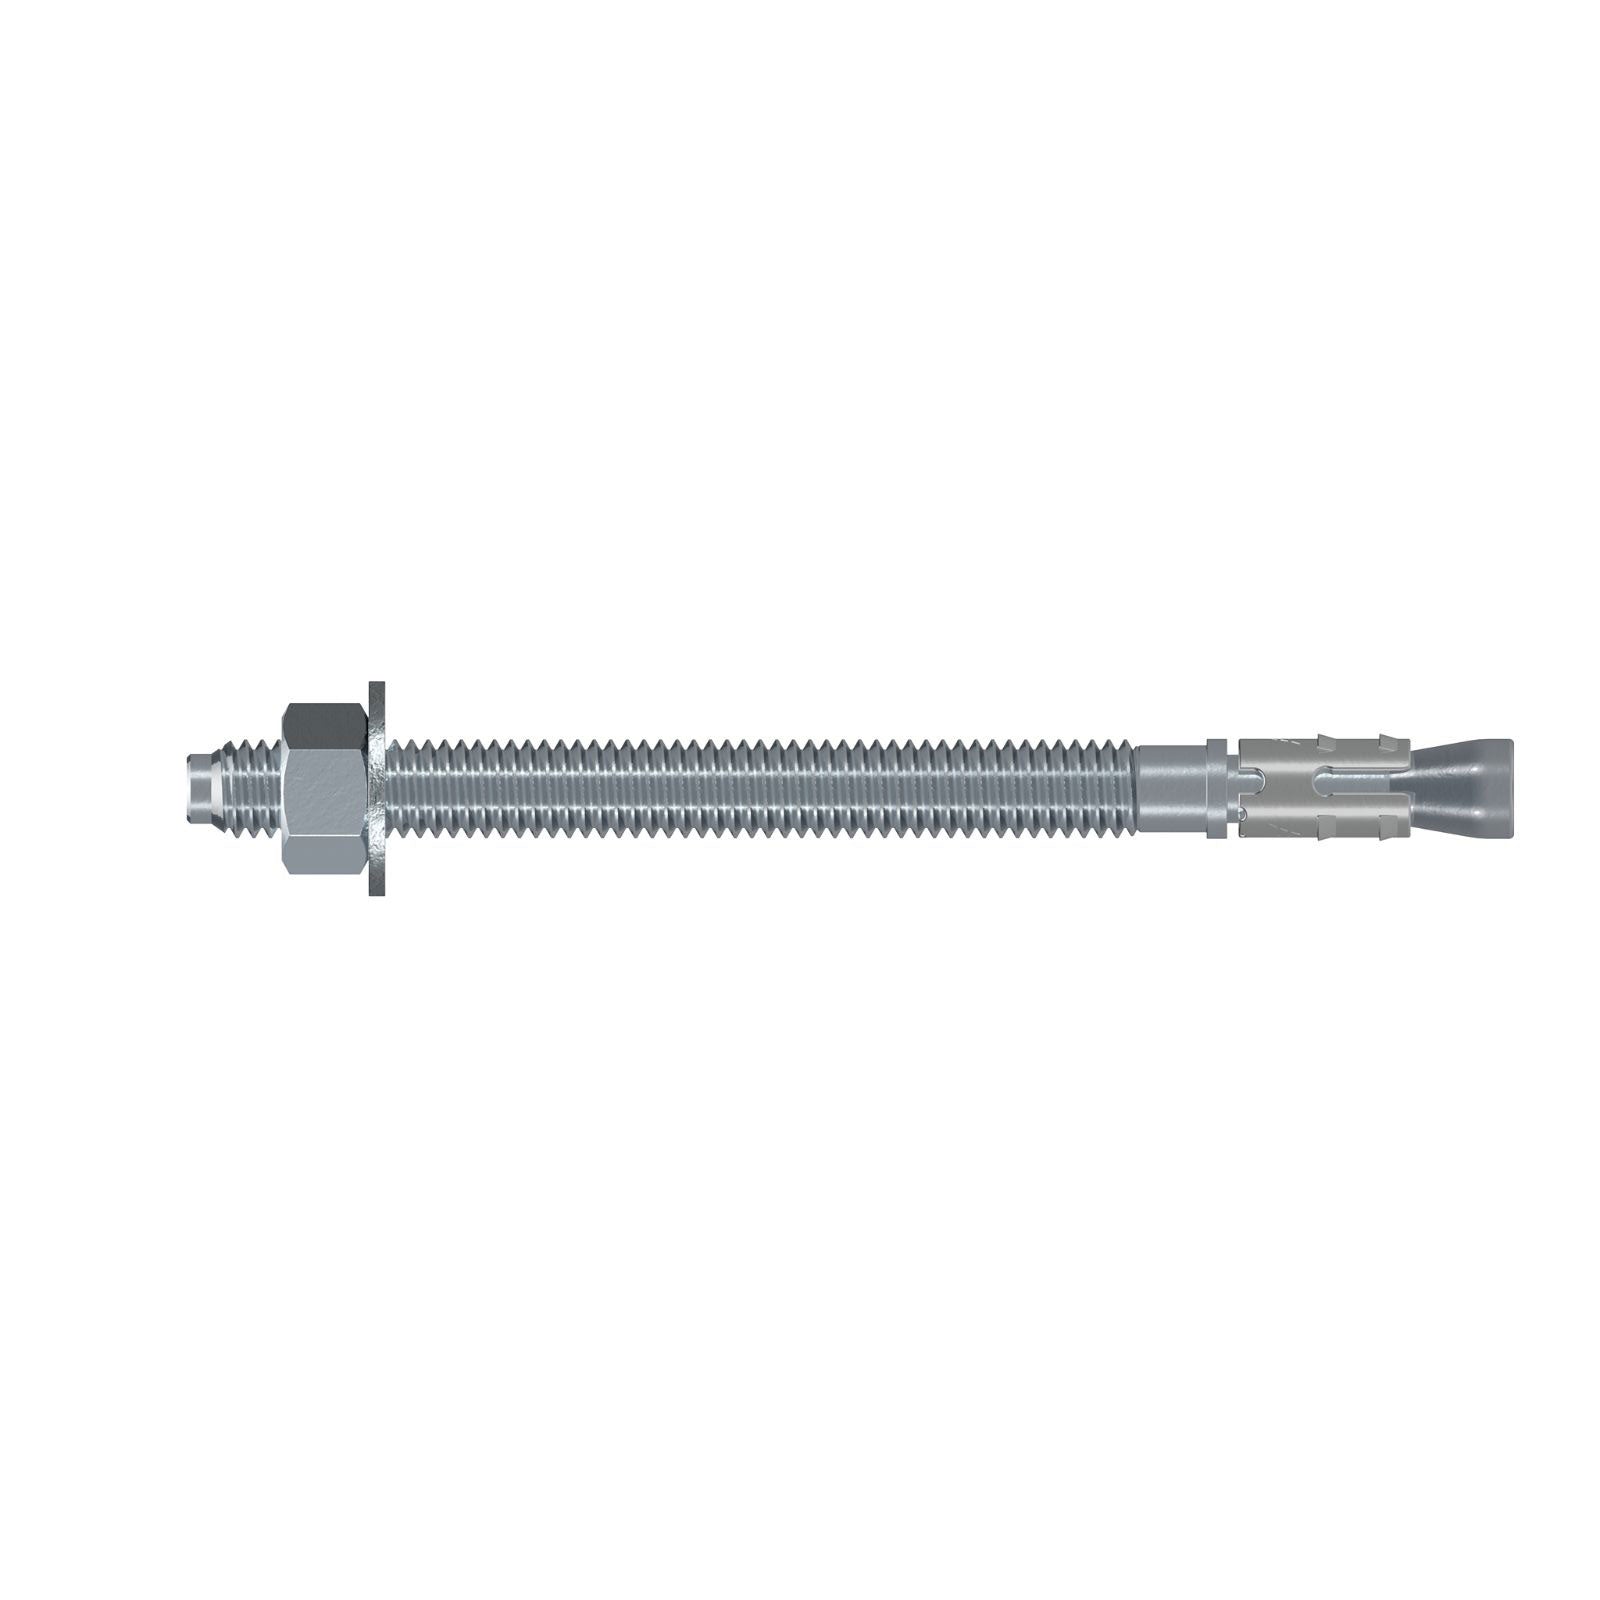 3/8" x 5" Simpson Strong Bolt 2 Wedge Anchor, Stainless Steel